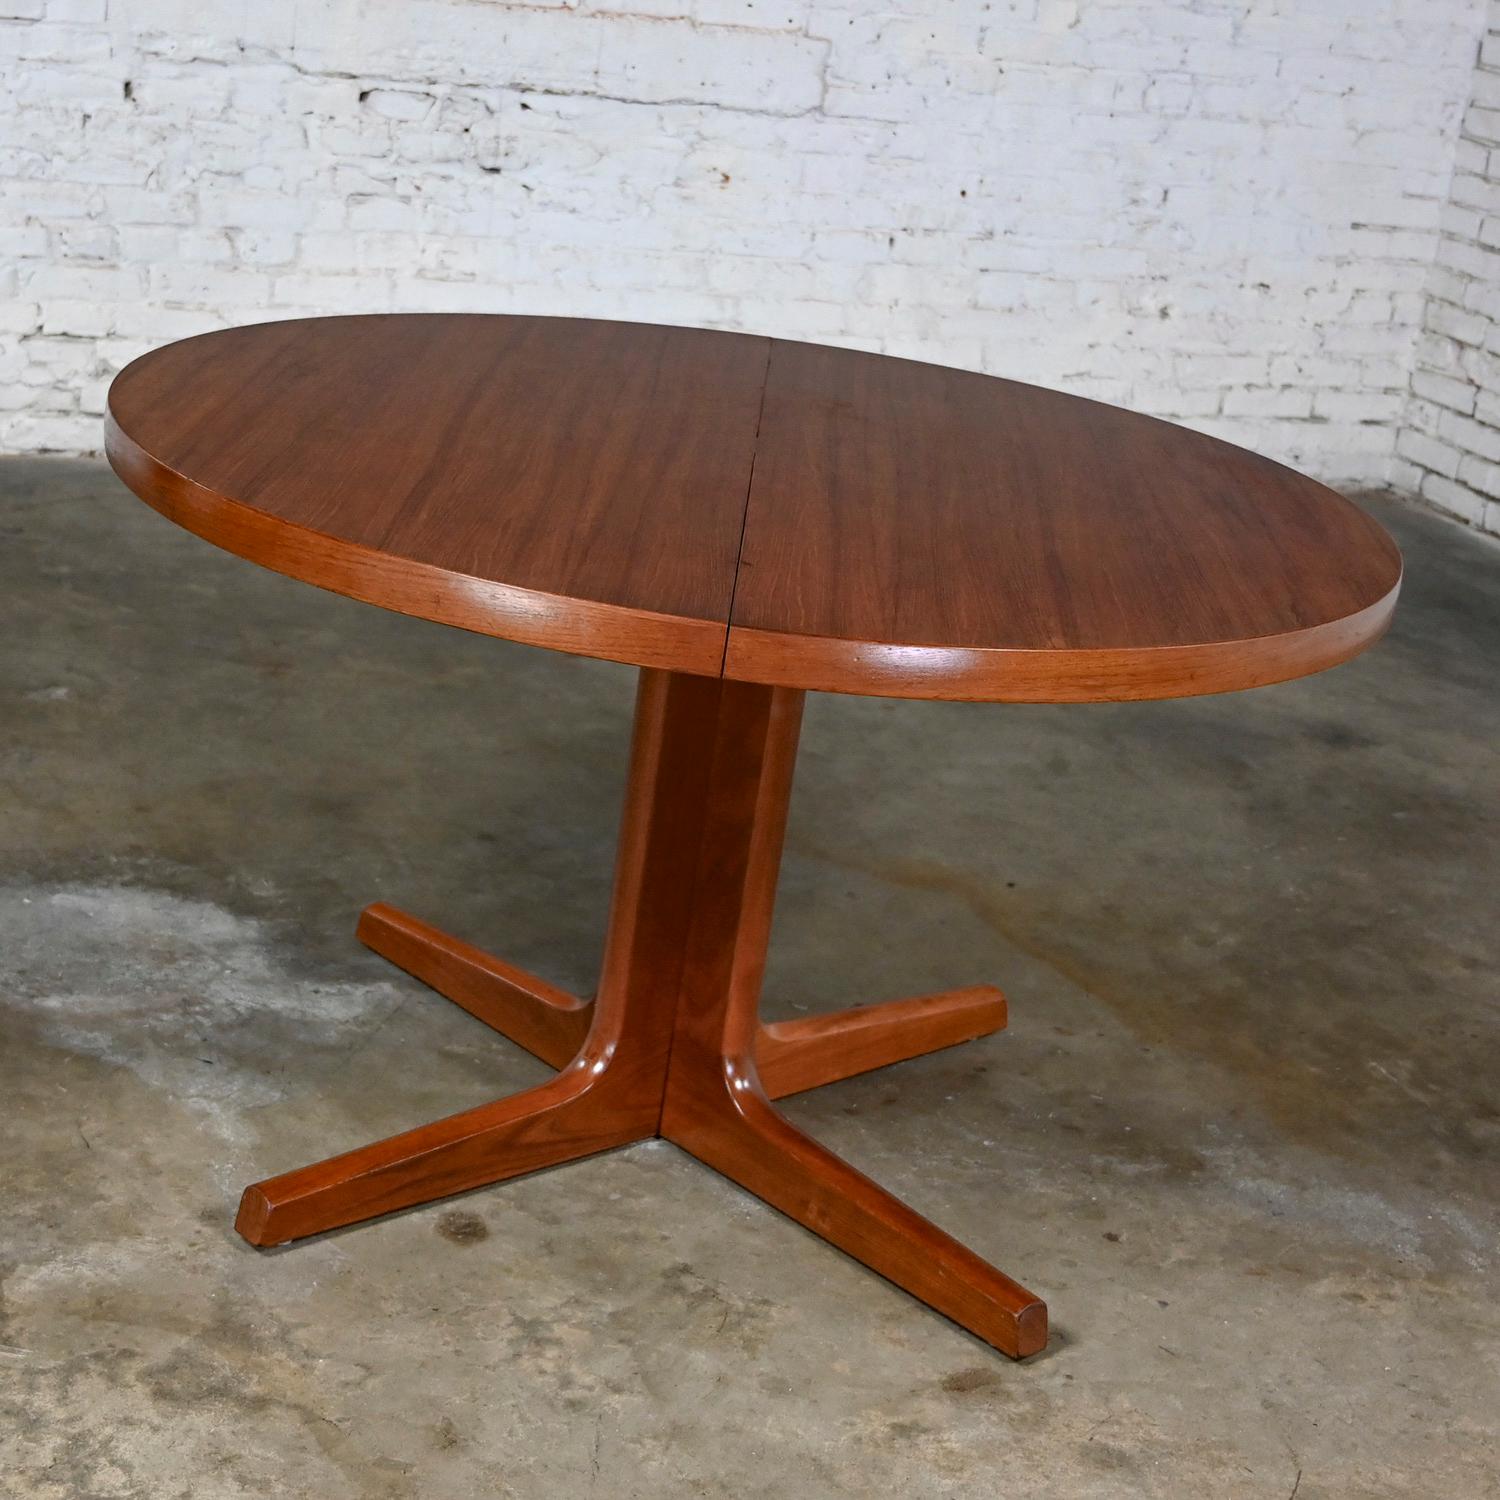 Handsome Mid-20th Century Scandinavian Modern teak round to oval extension dining table with pedestal base and 2 leaves by Ansanger Mobler. It bears the AM Made in Denmark stamp on its underside. Beautiful condition, keeping in mind that this is